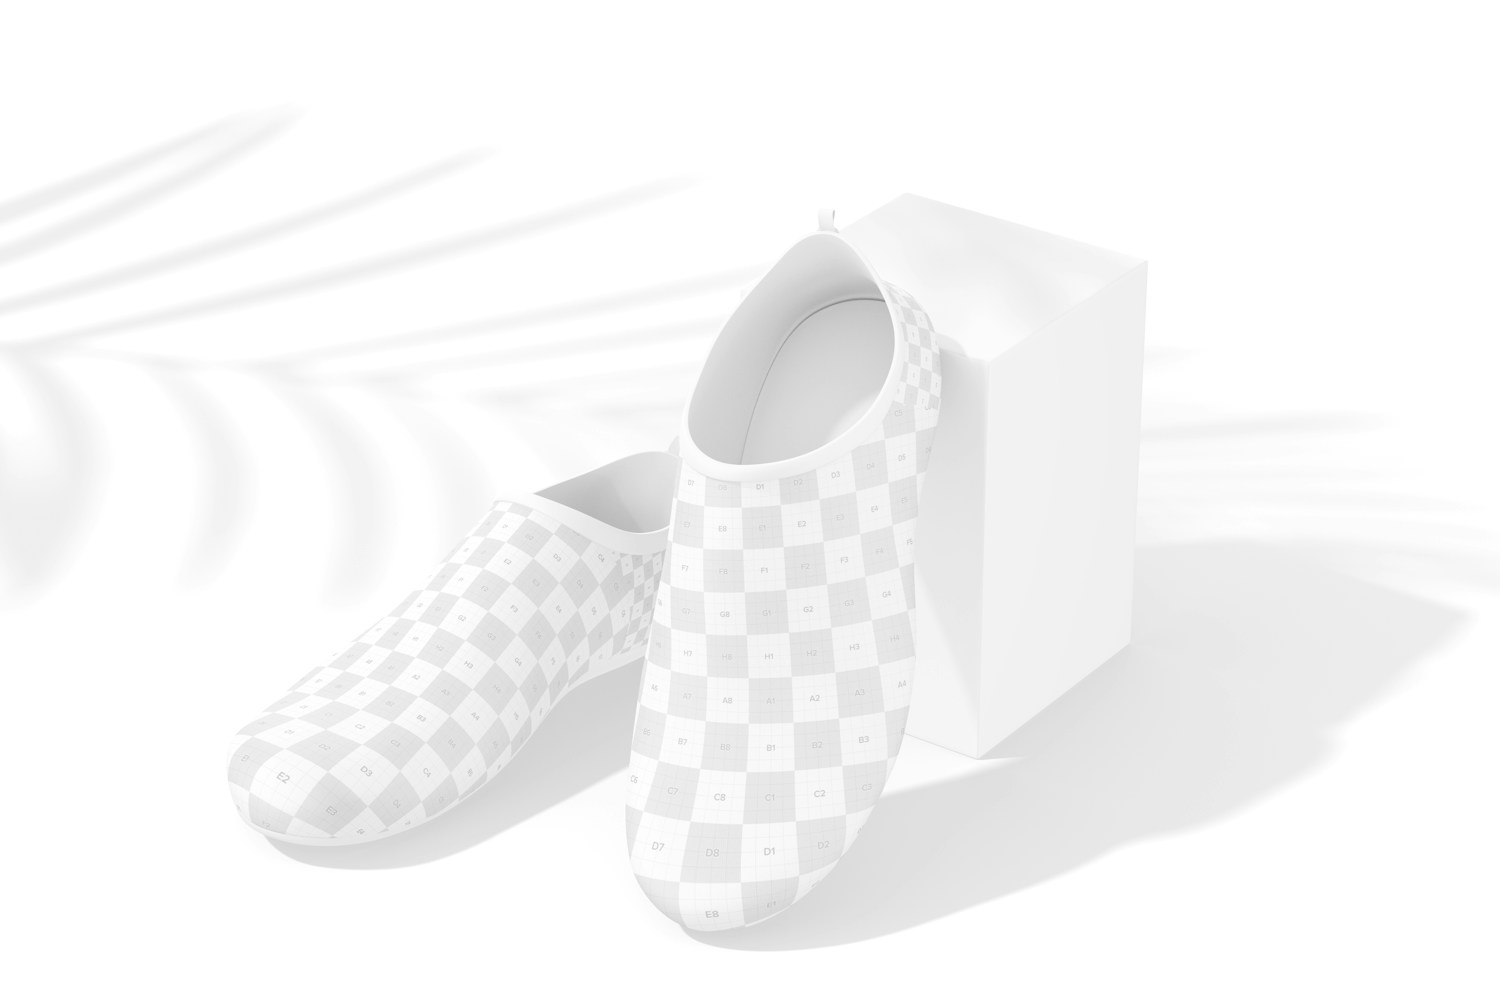 Water Shoes Mockup, Perspective